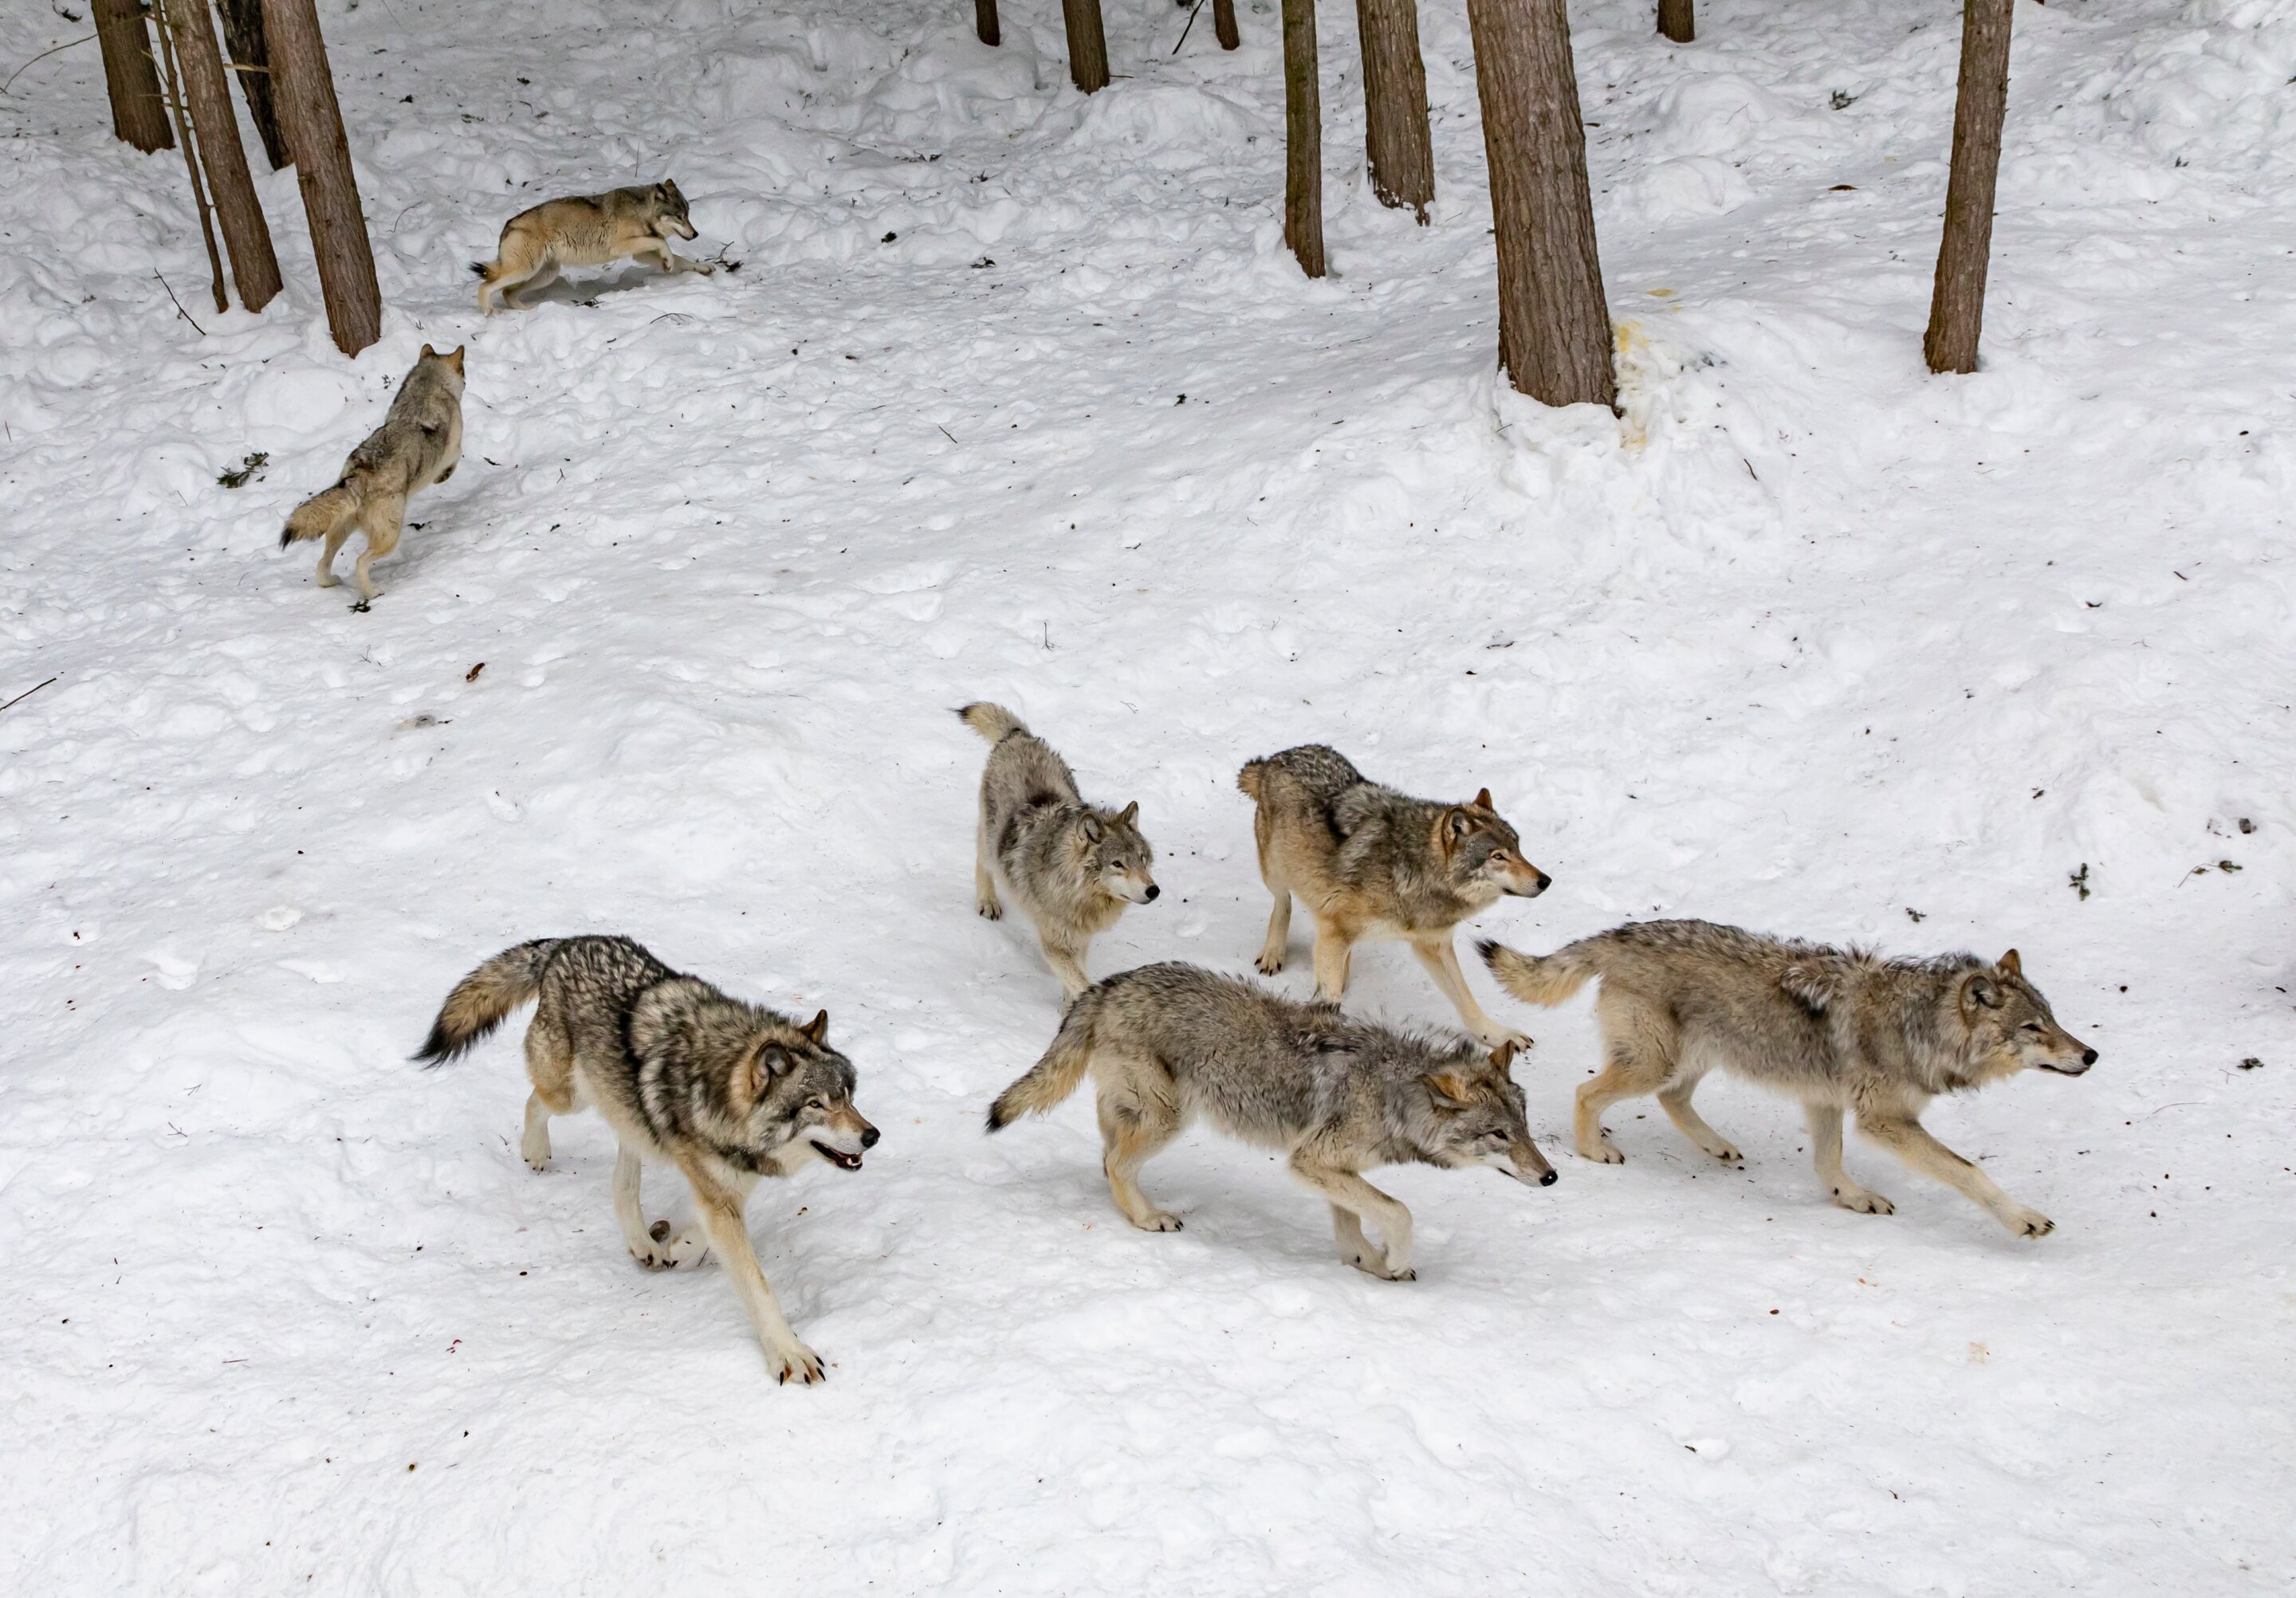 A 30% reduction in Wisconsin's wolf population